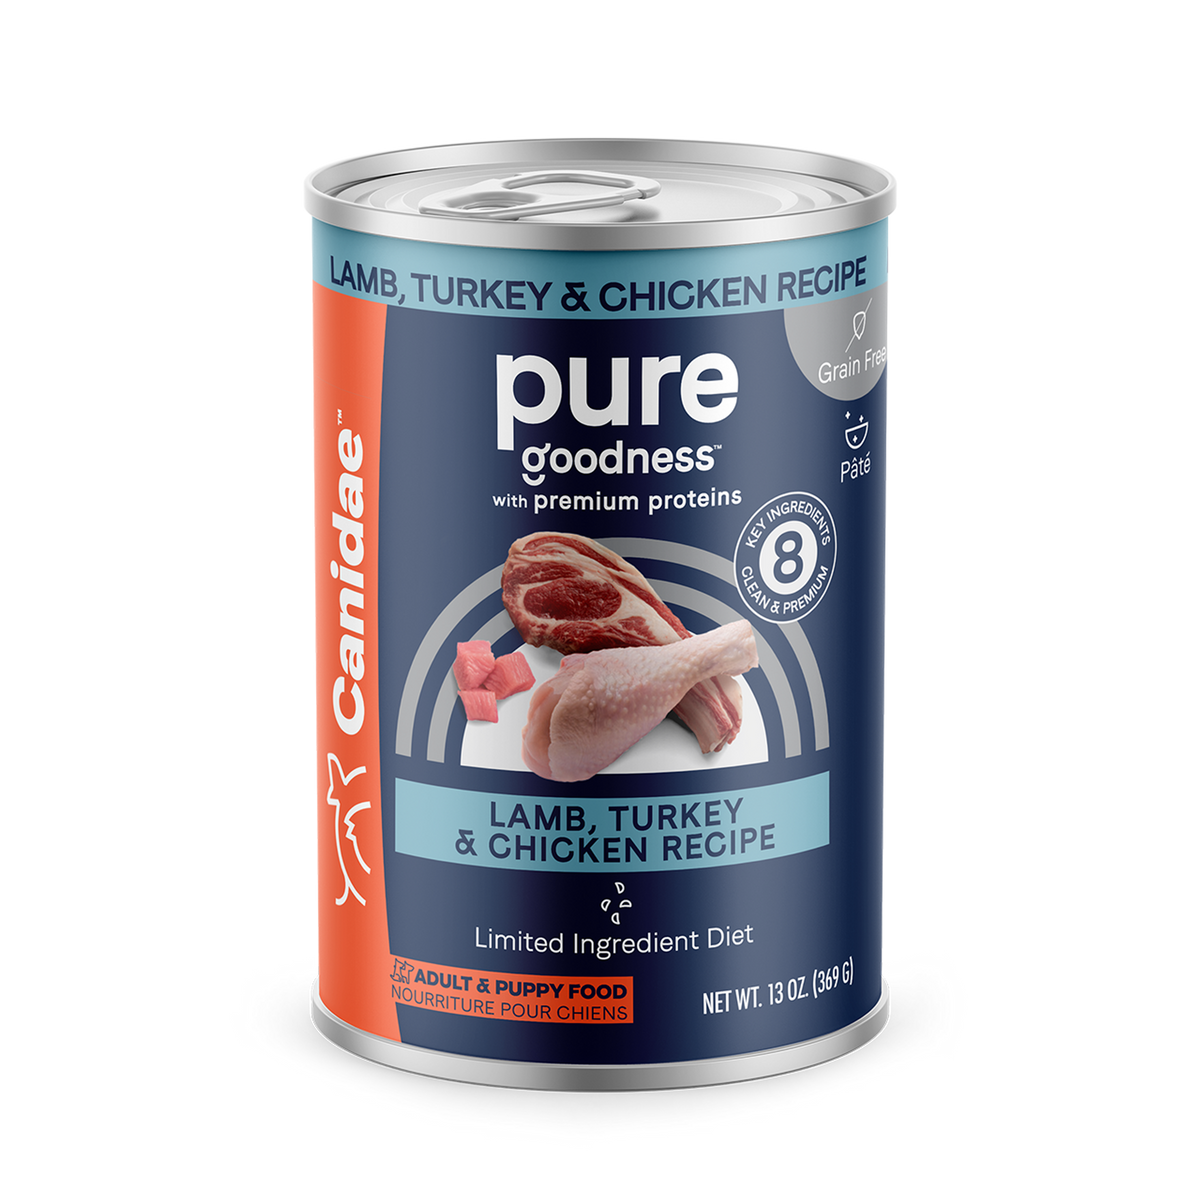 Canidae - All Breeds, Adult Dog Elements - Grain-Free Lamb, Turkey & Chicken Formula Canned Dog Food